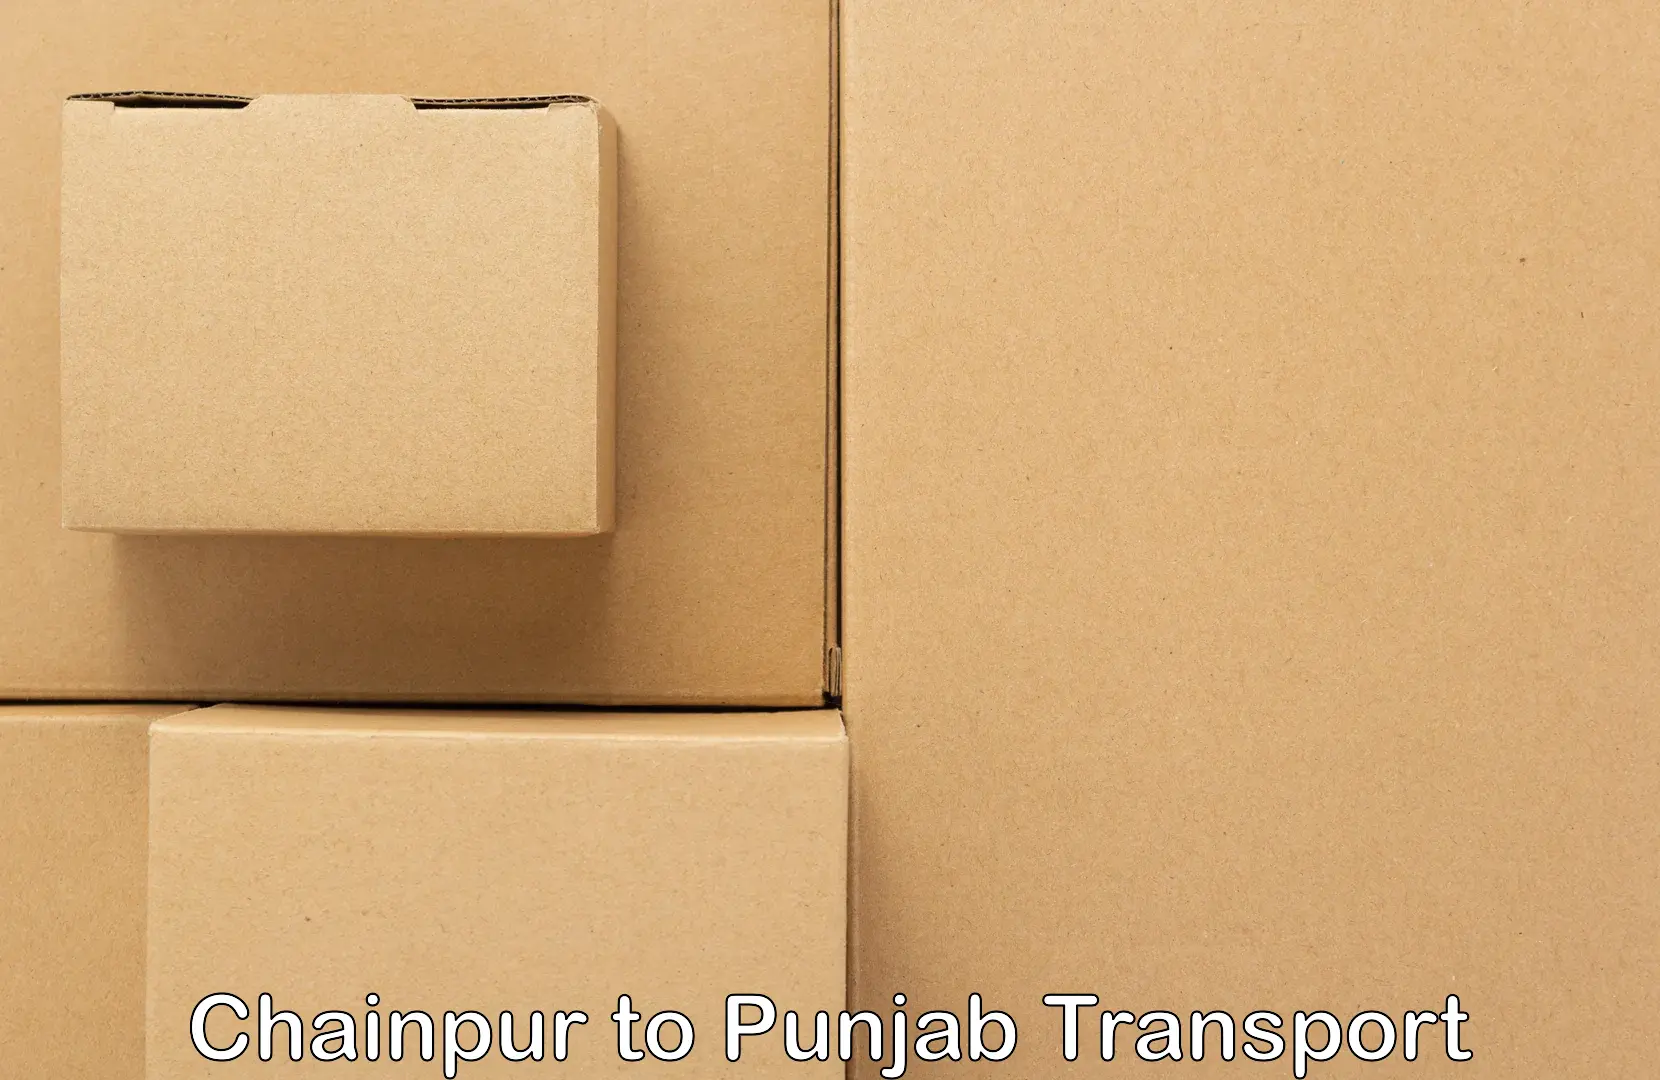 Delivery service Chainpur to Fatehgarh Sahib